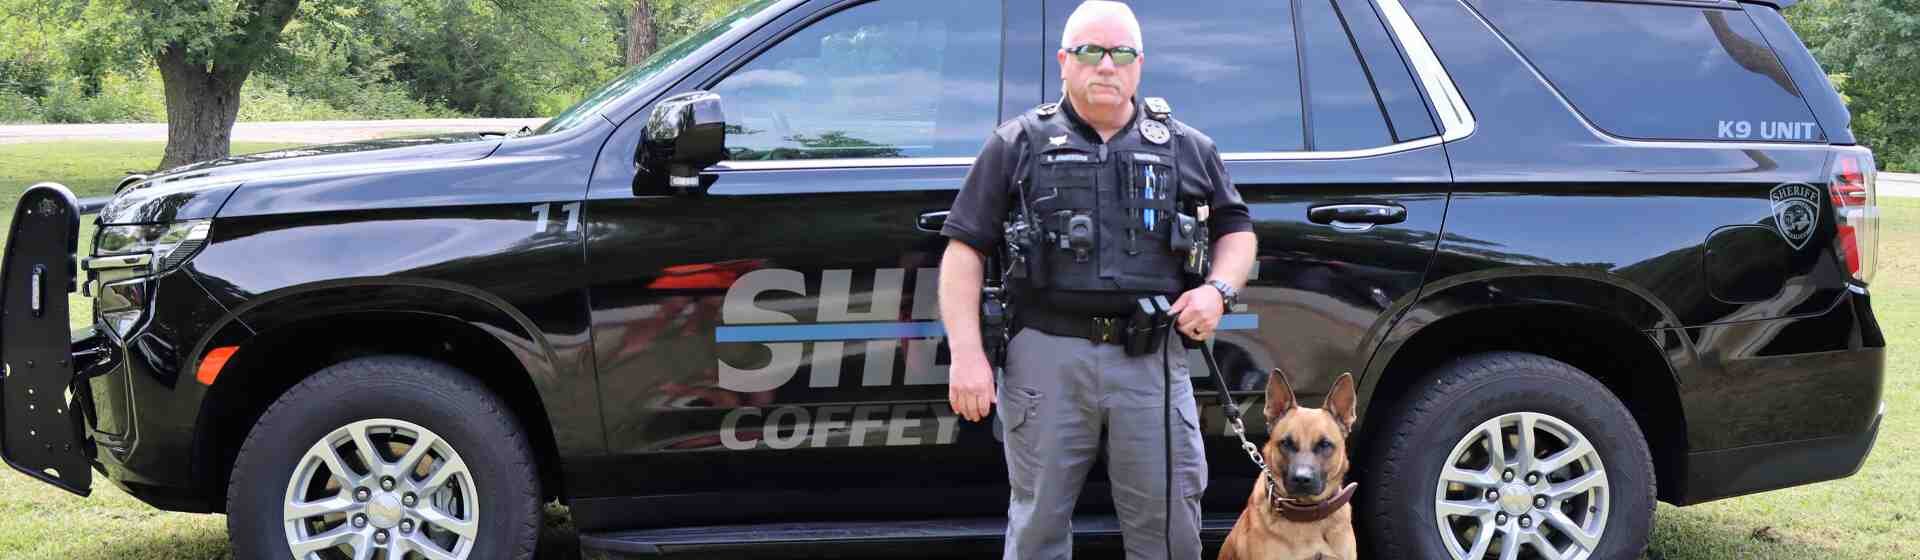 K-9 owner and his brown dog stand in front of their sheriff vehicle.